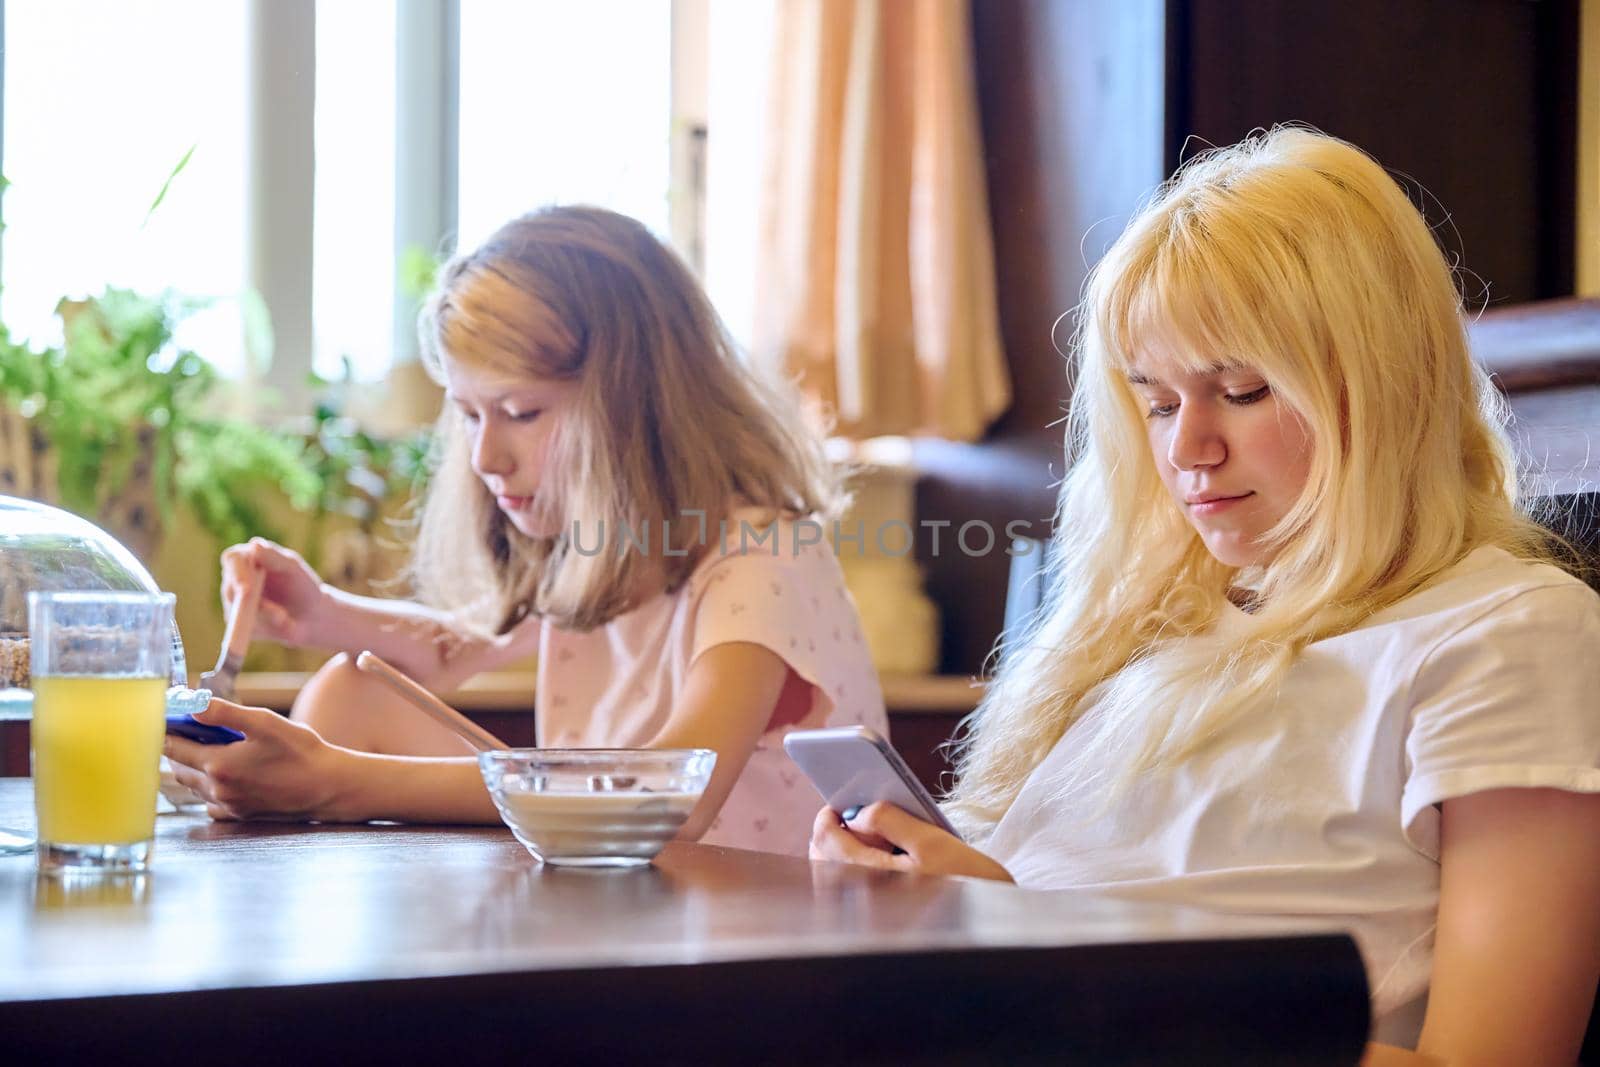 Children two girls sisters eating at home, looking at smartphones. Teenagers having breakfast in kitchen, using phones for leisure entertainment education. Technology in life lifestyle, adolescence